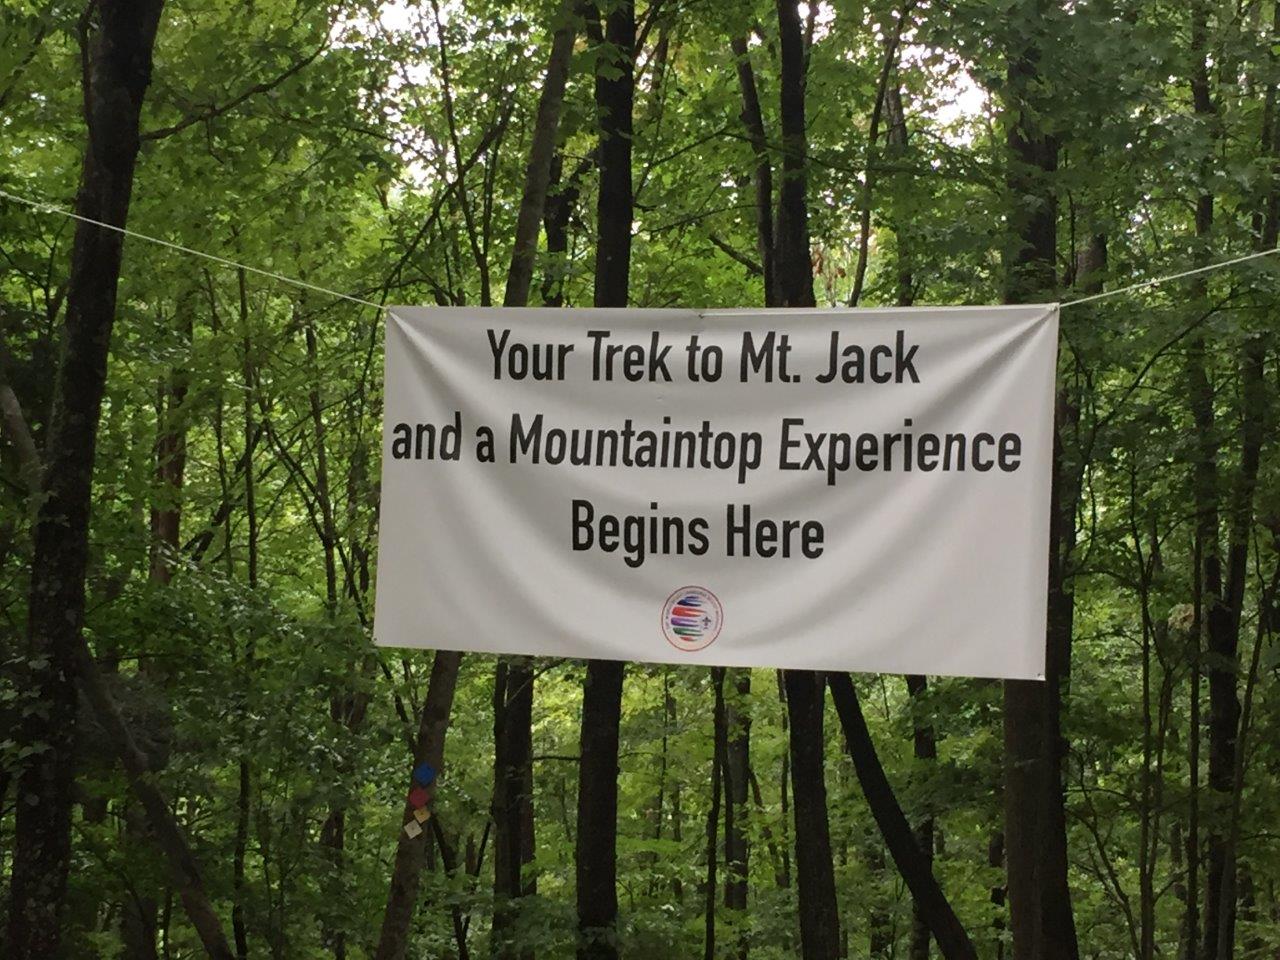 A Day at Mount Jack